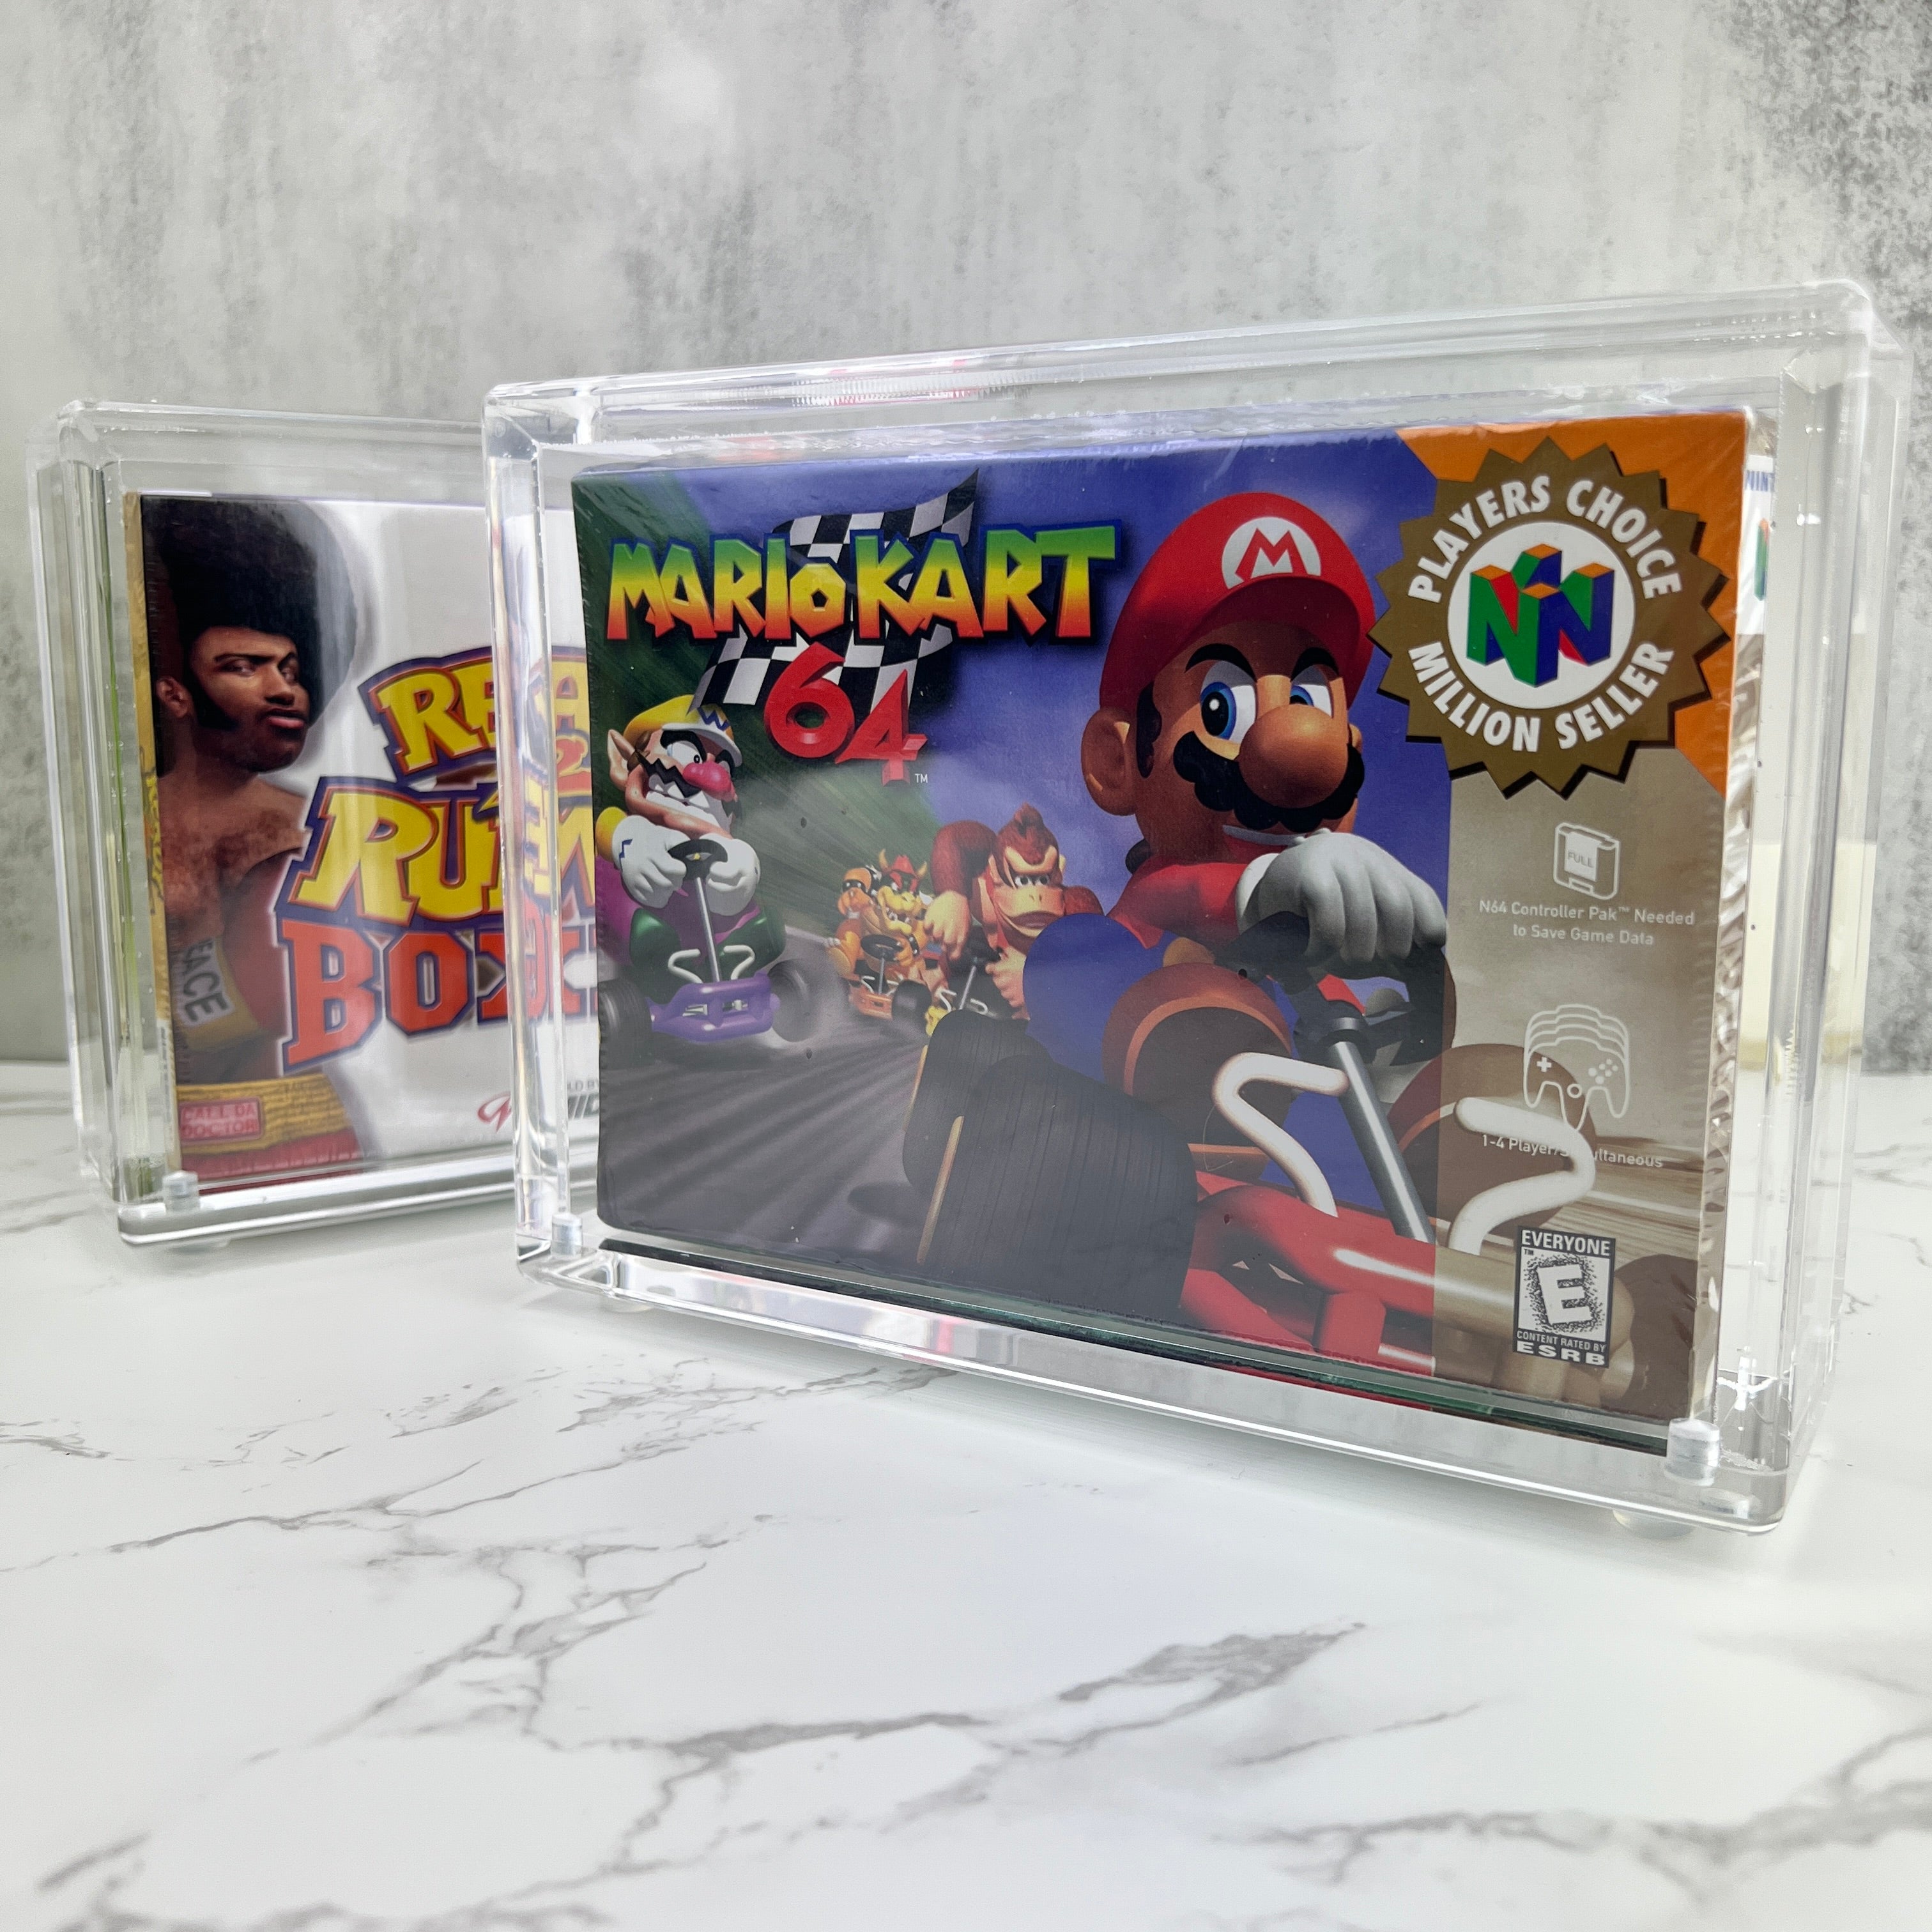 Nintendo 64 (N64) magnetic acrylic protective case. Crystal clear acrylic, with UV resistance.